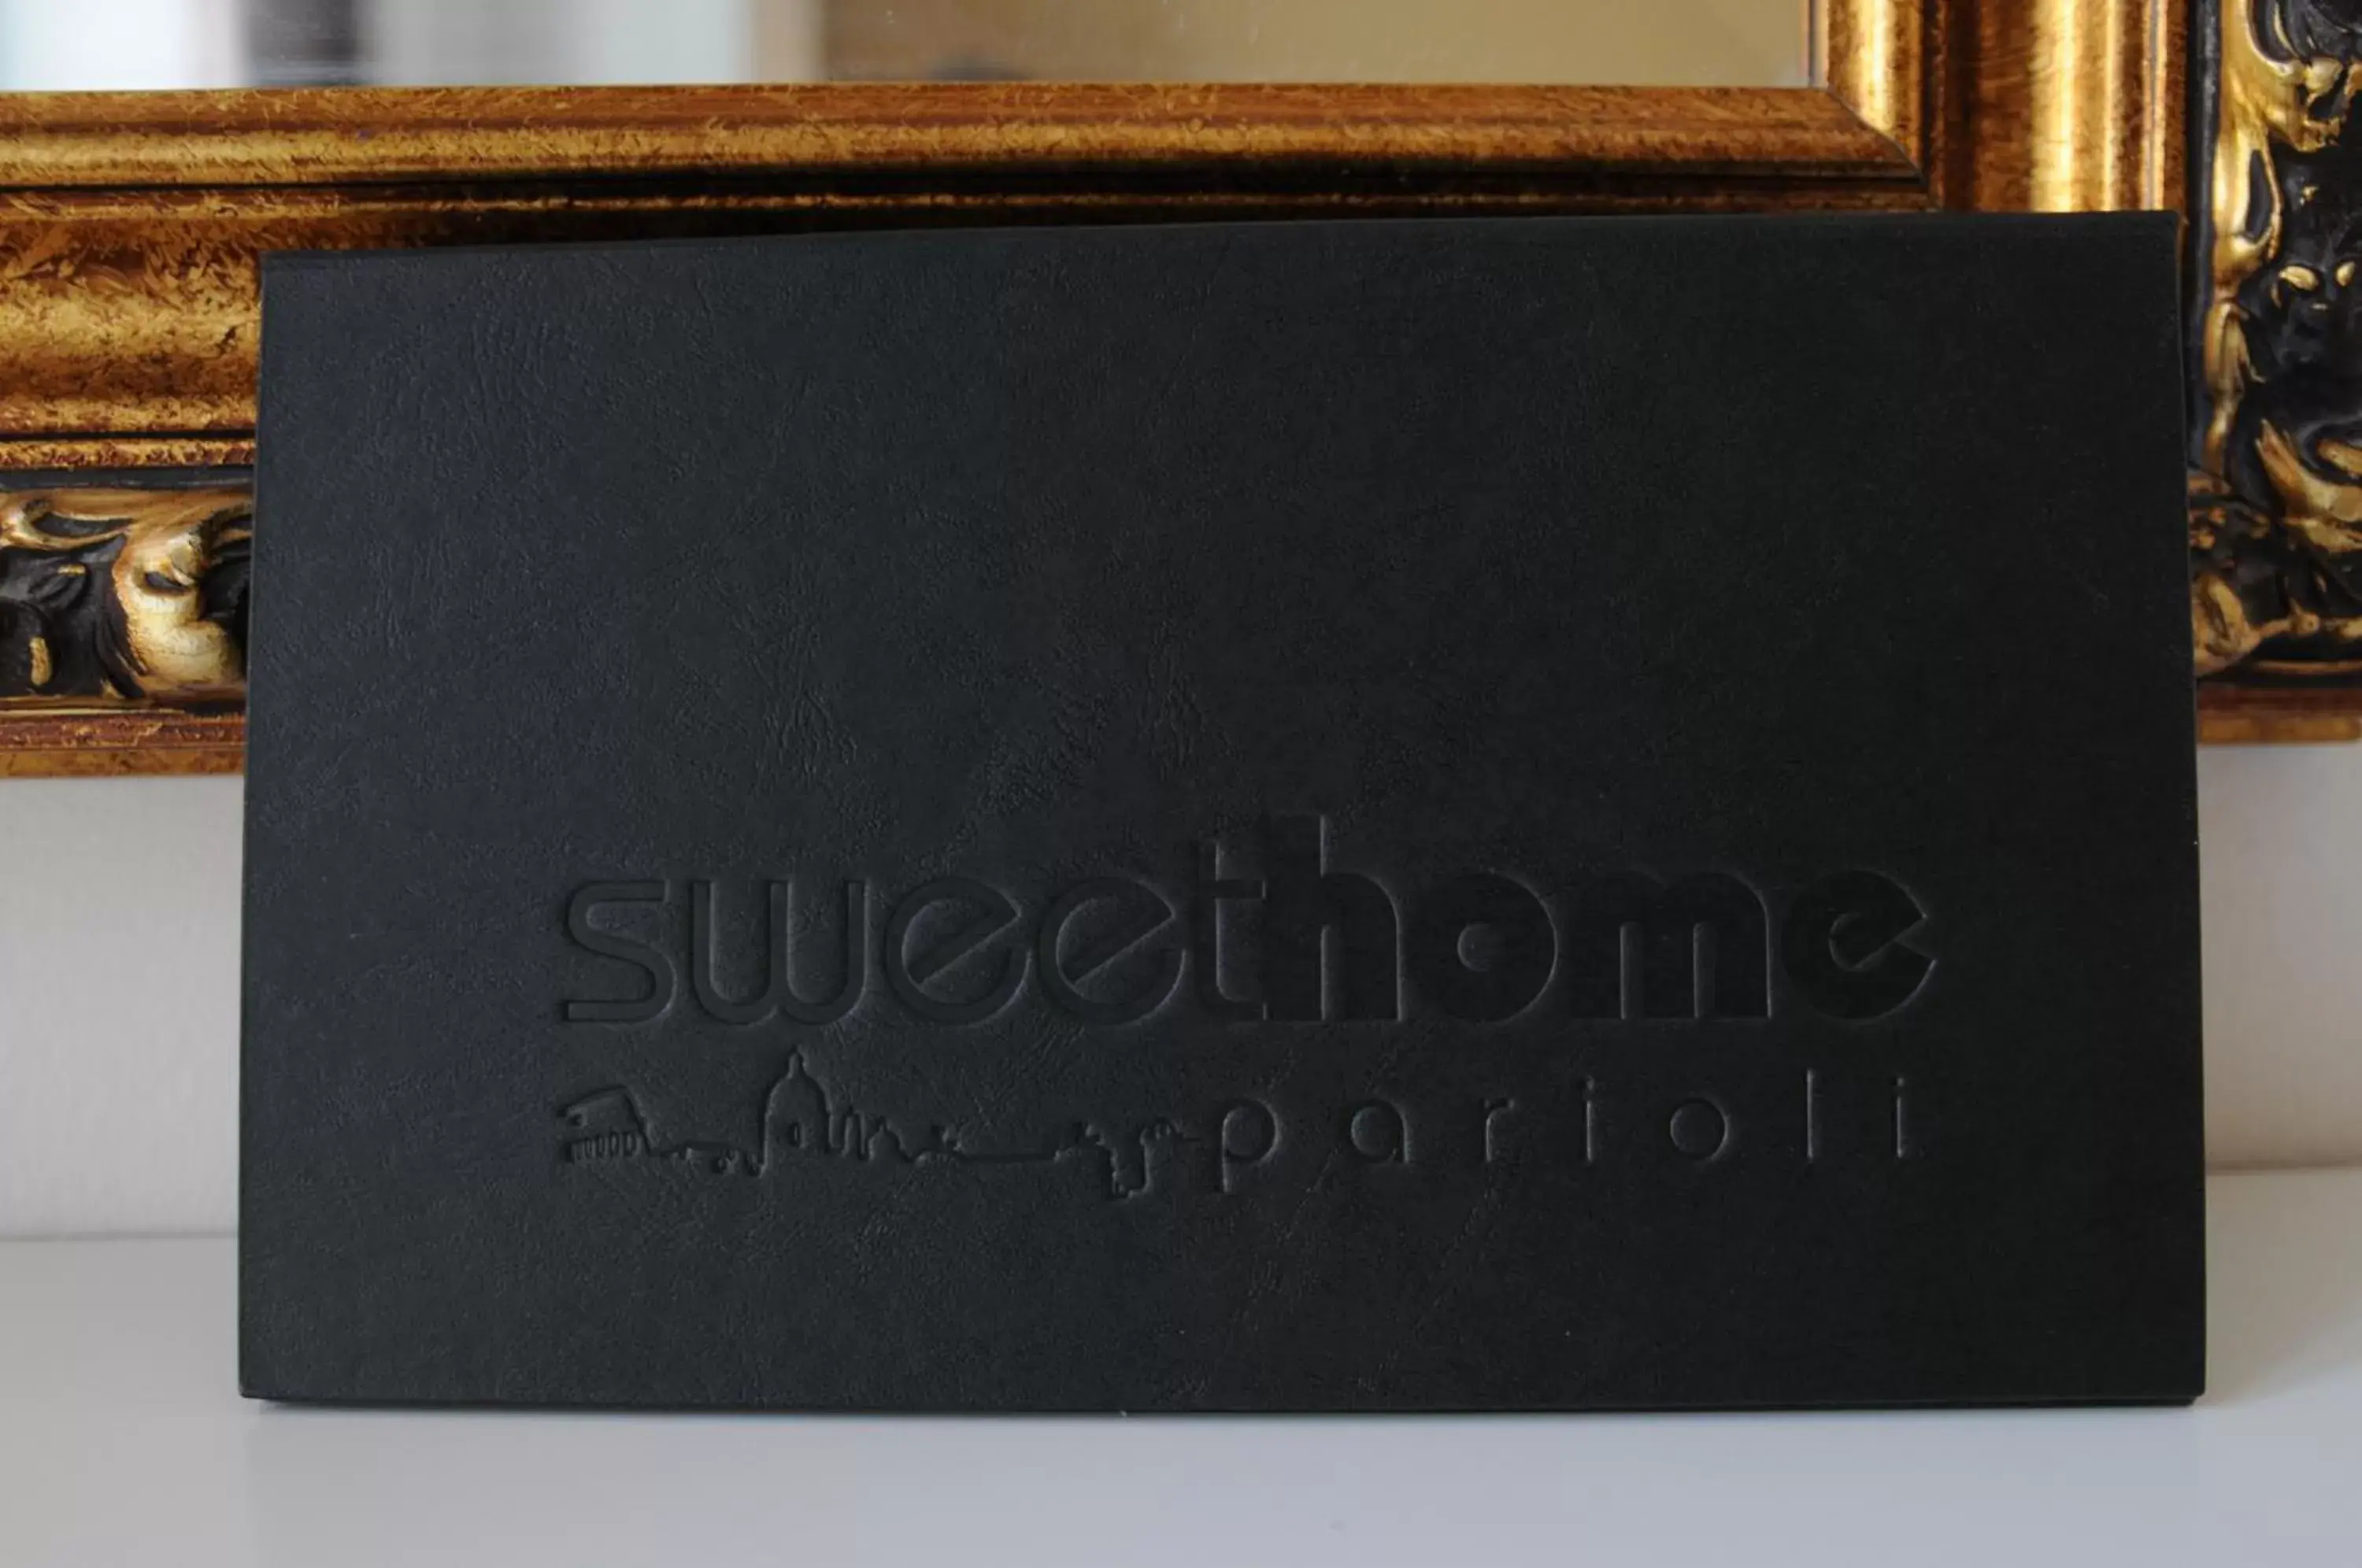 Property logo or sign in Sweet Home Parioli